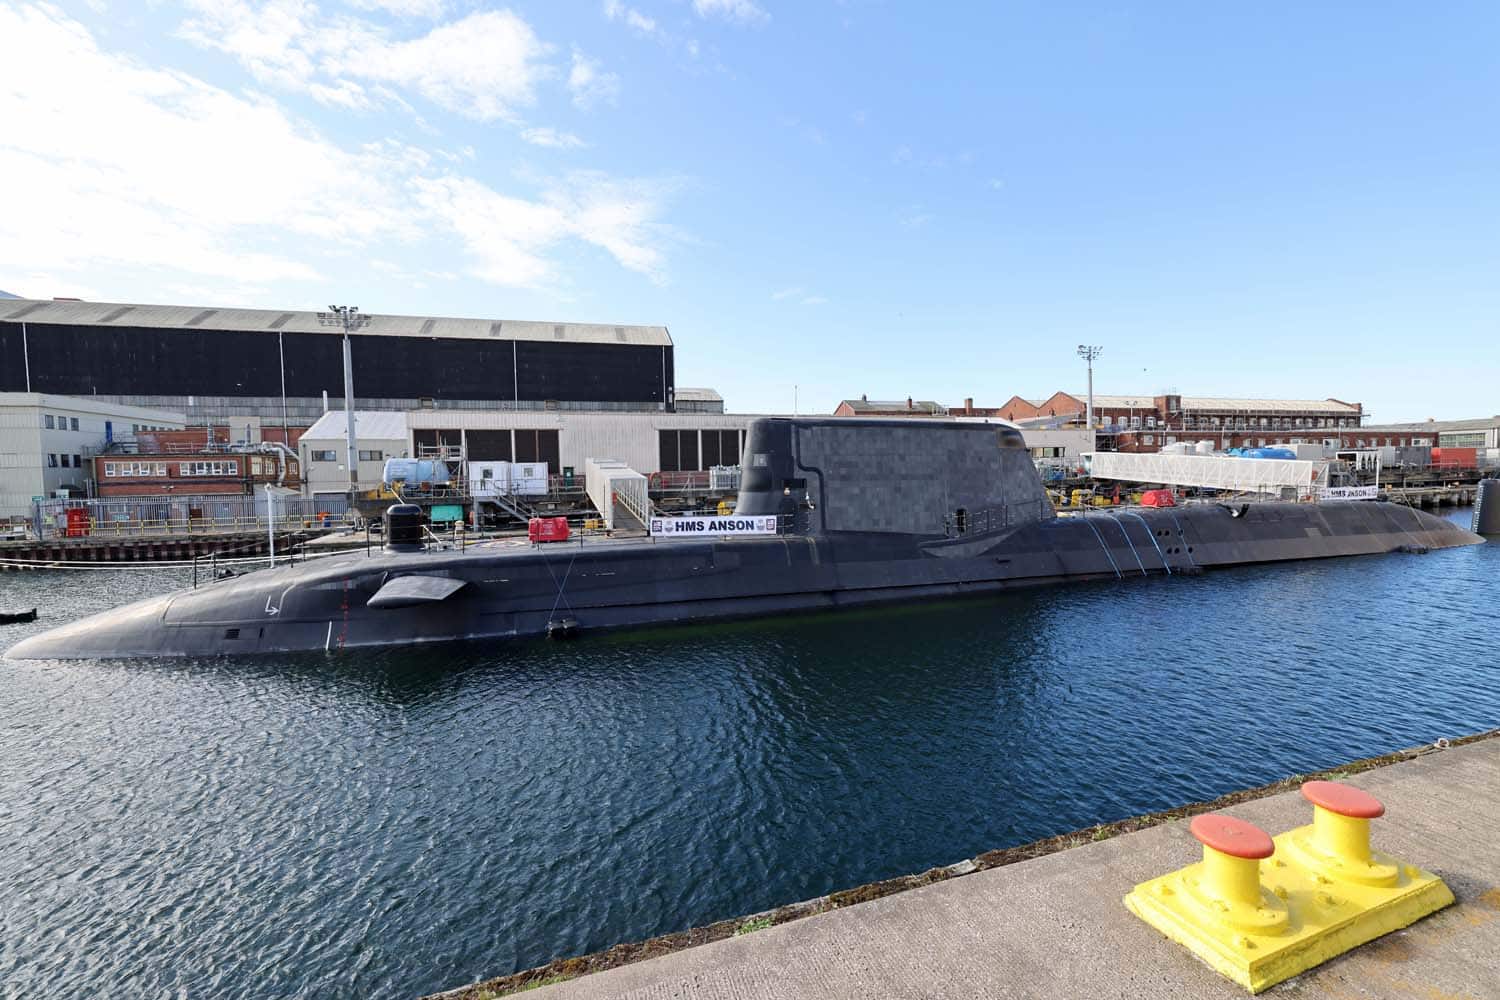 The Great Britain received the fifth nuclear submarine of the Astute type with Spearfish torpedoes, Tomahawk and Harpoon missiles valued £1.3 billion